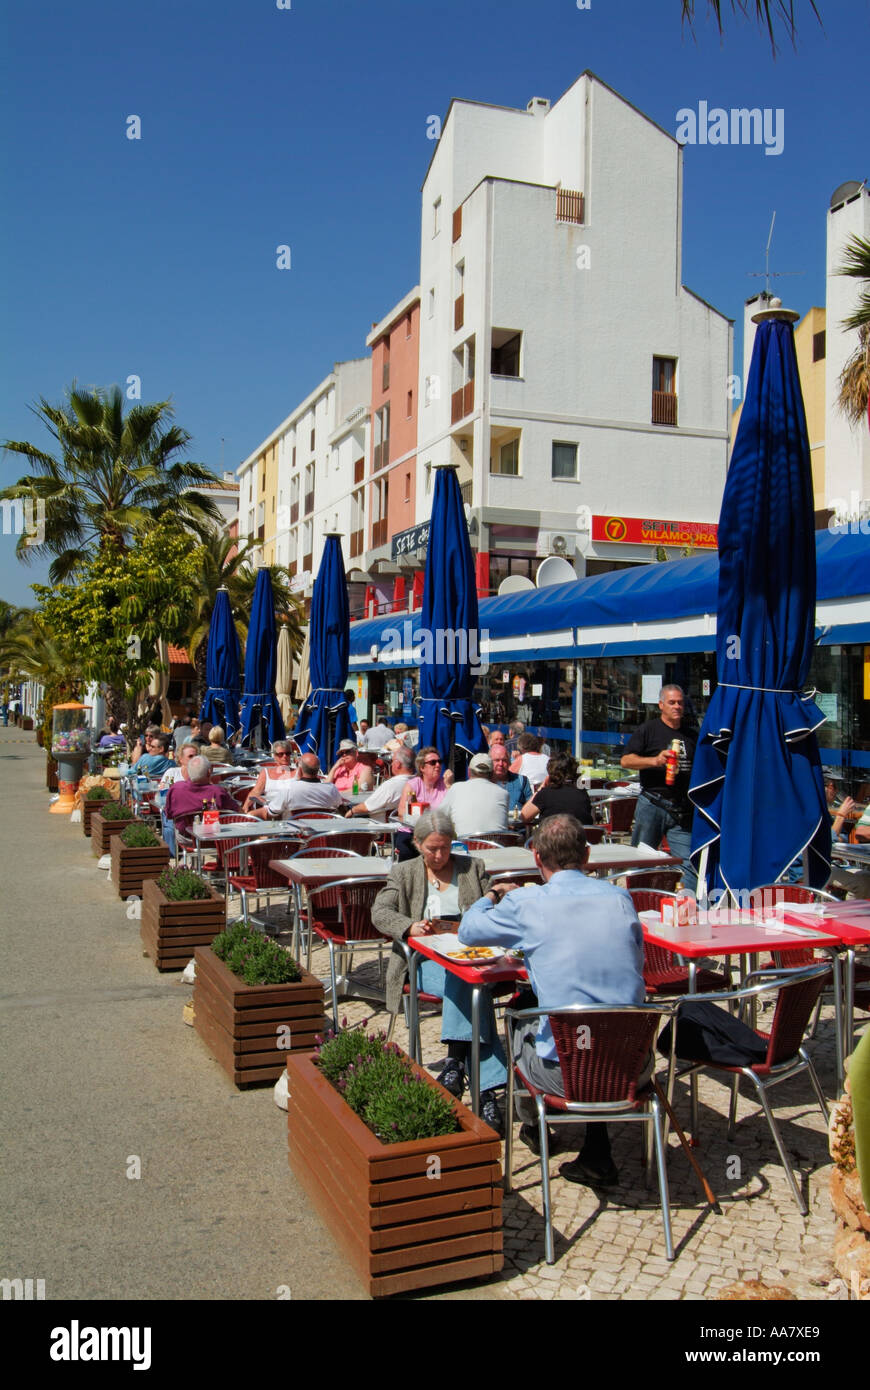 Diners in a cafe restaurant in the busy marina at Vilamoura Algarve Portugal EU Europe Stock Photo